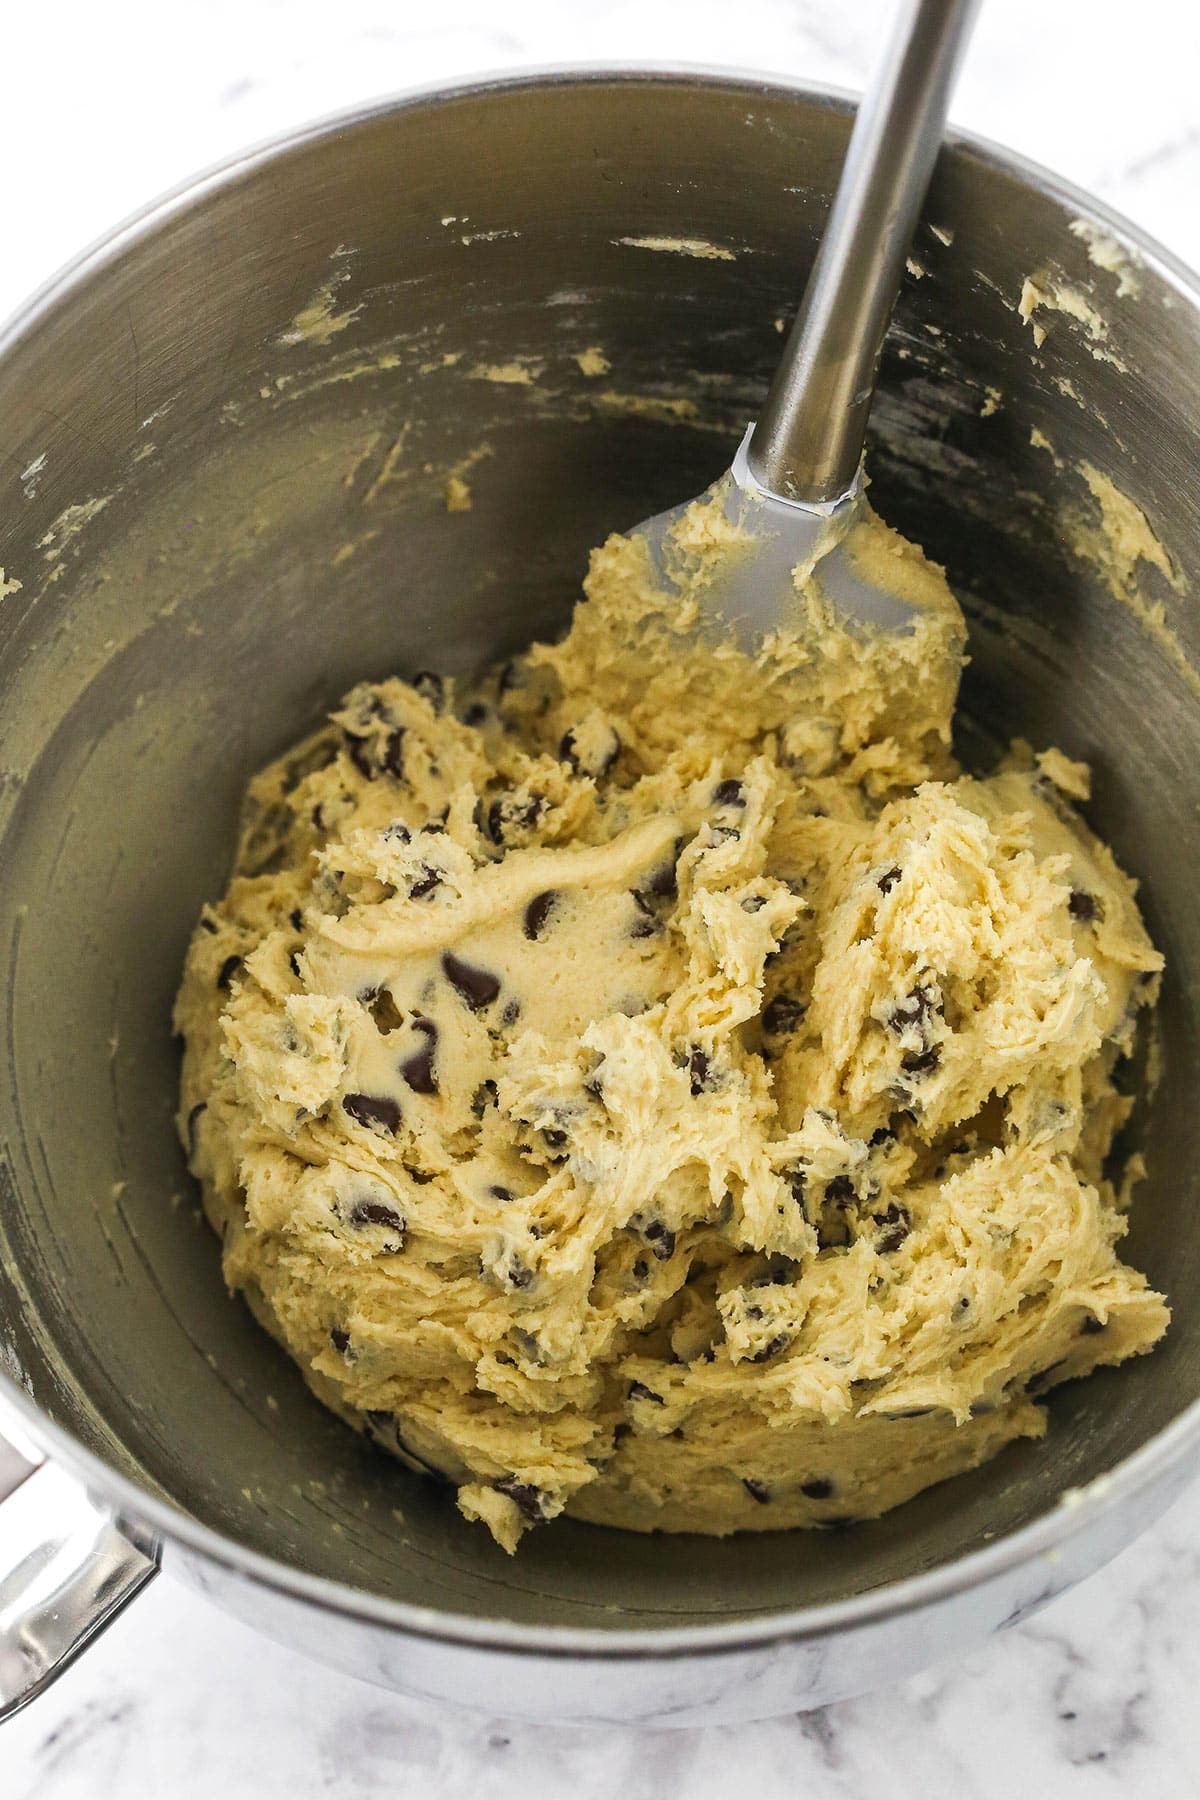 Completed chocolate chip cookie dough in a big metal bowl with a rubber spatula.